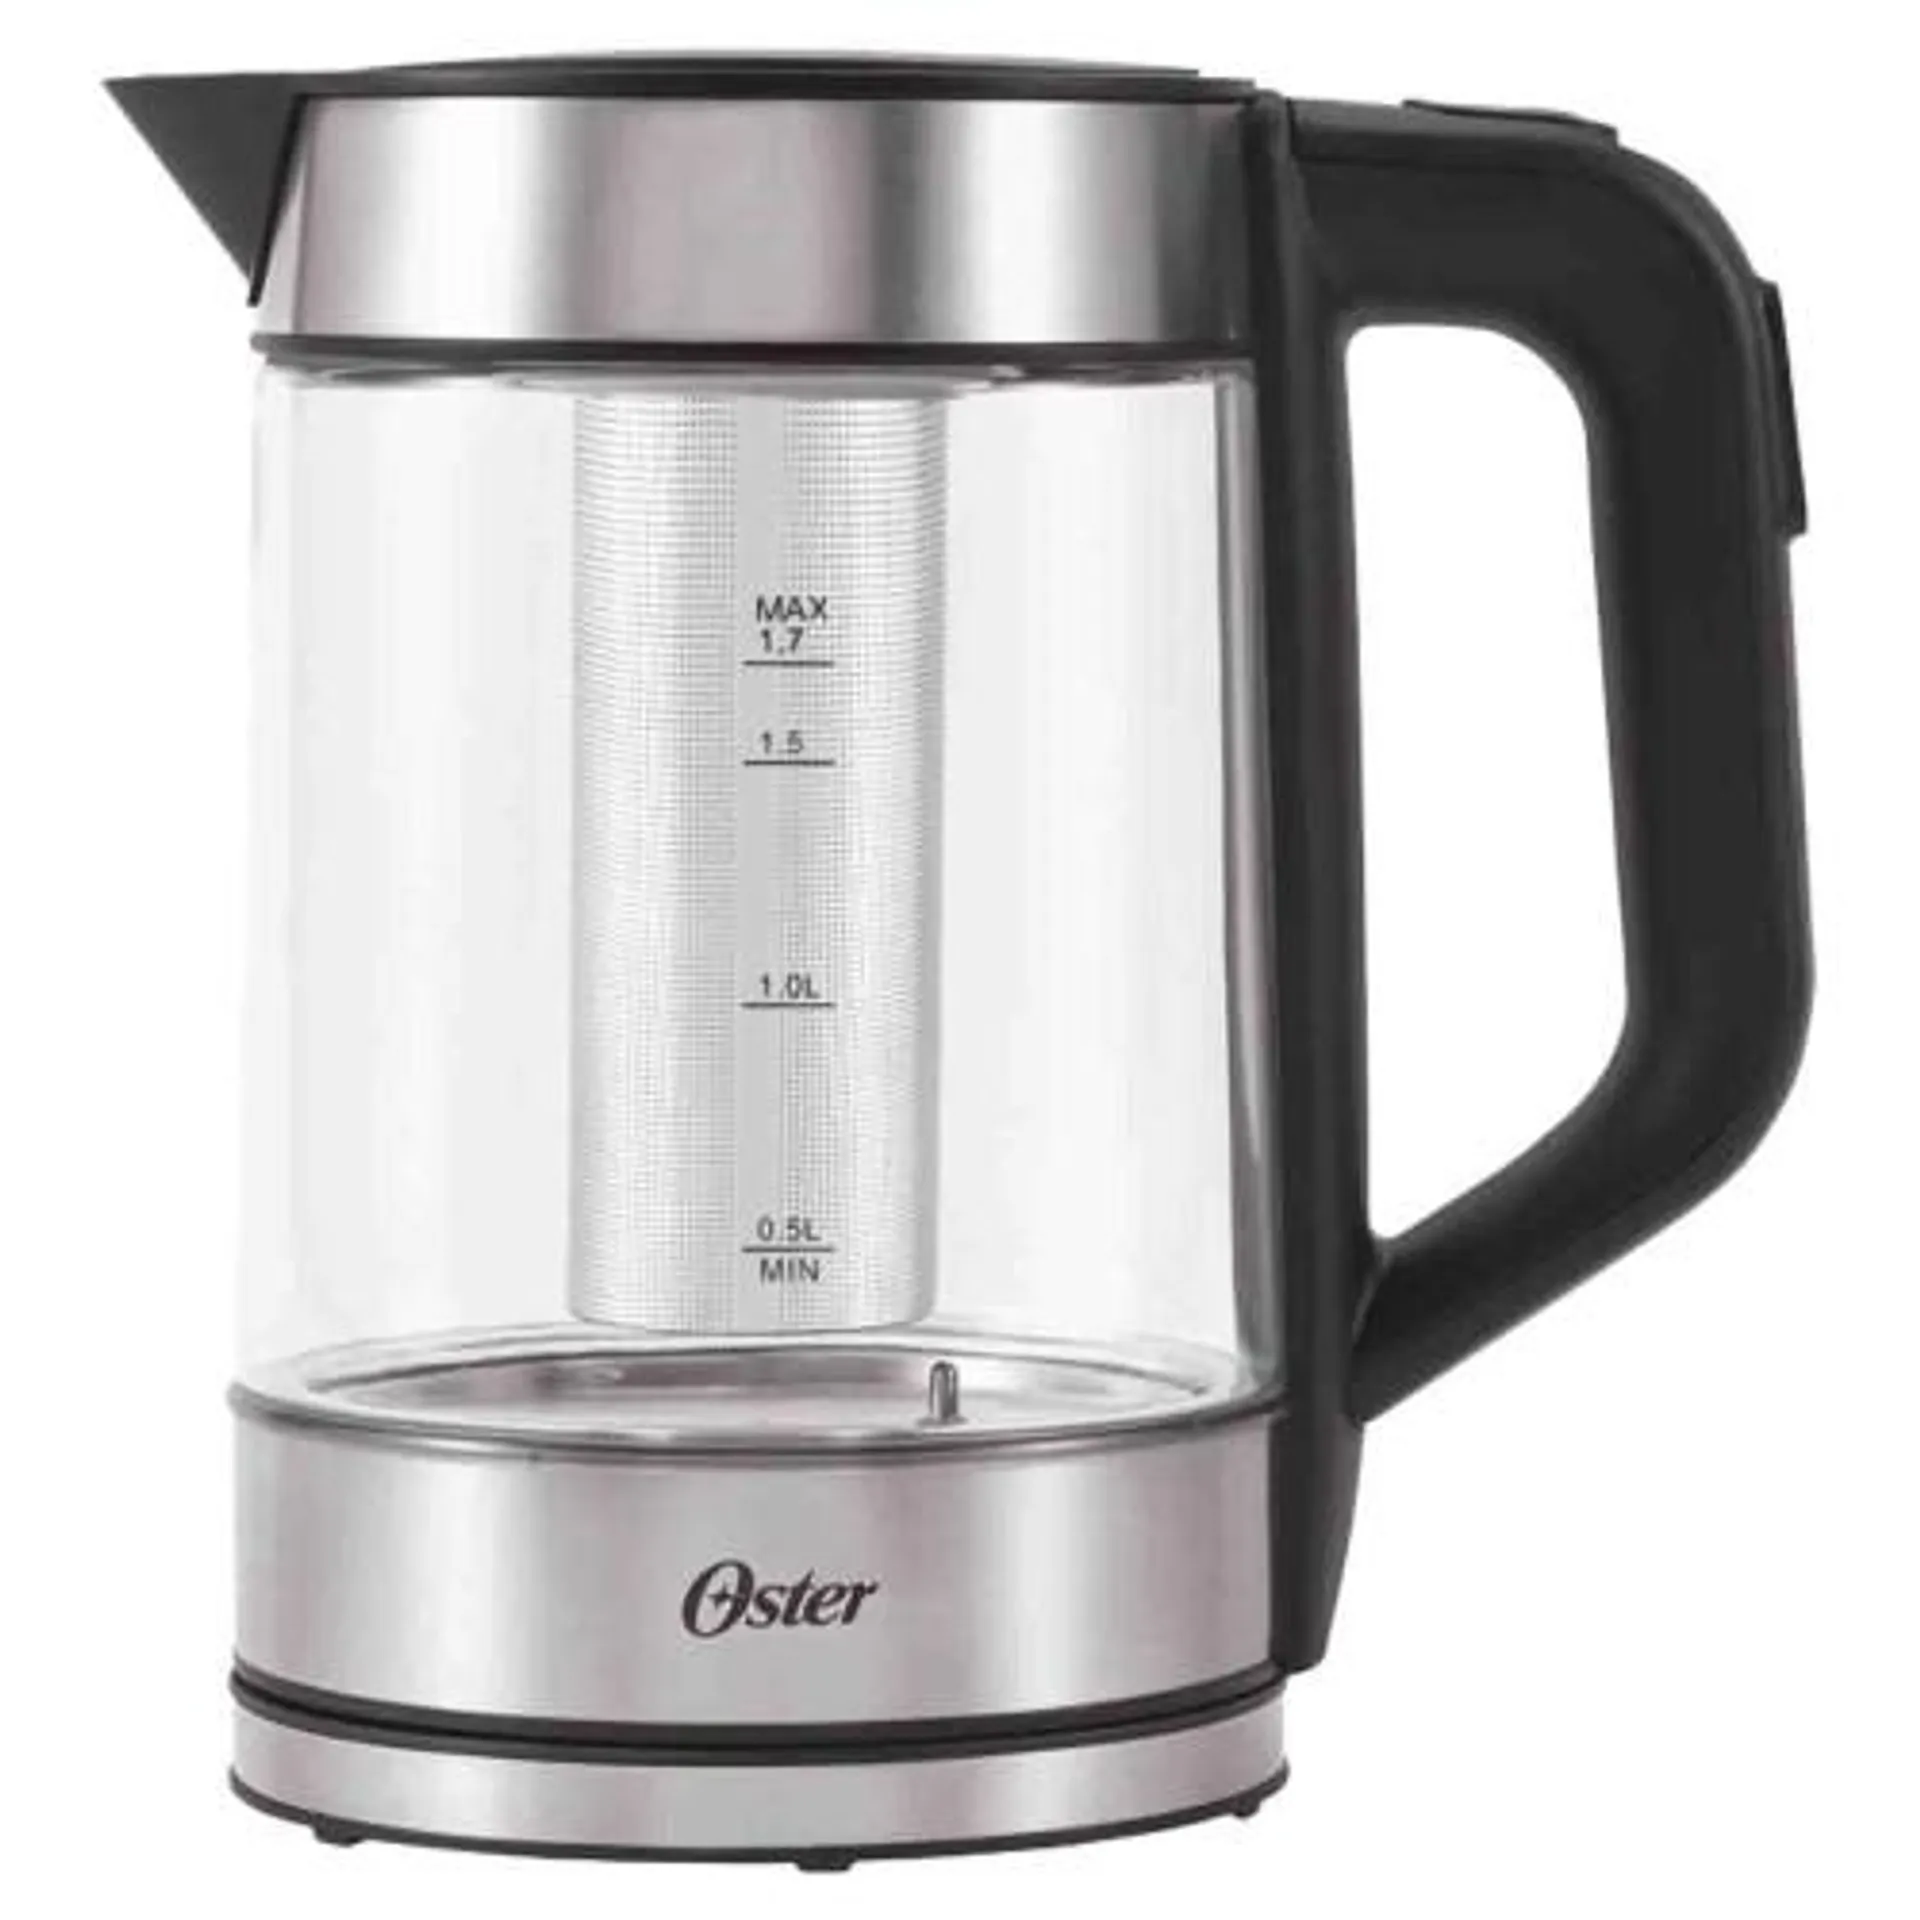 Oster Class Kettle With Tea Infuser